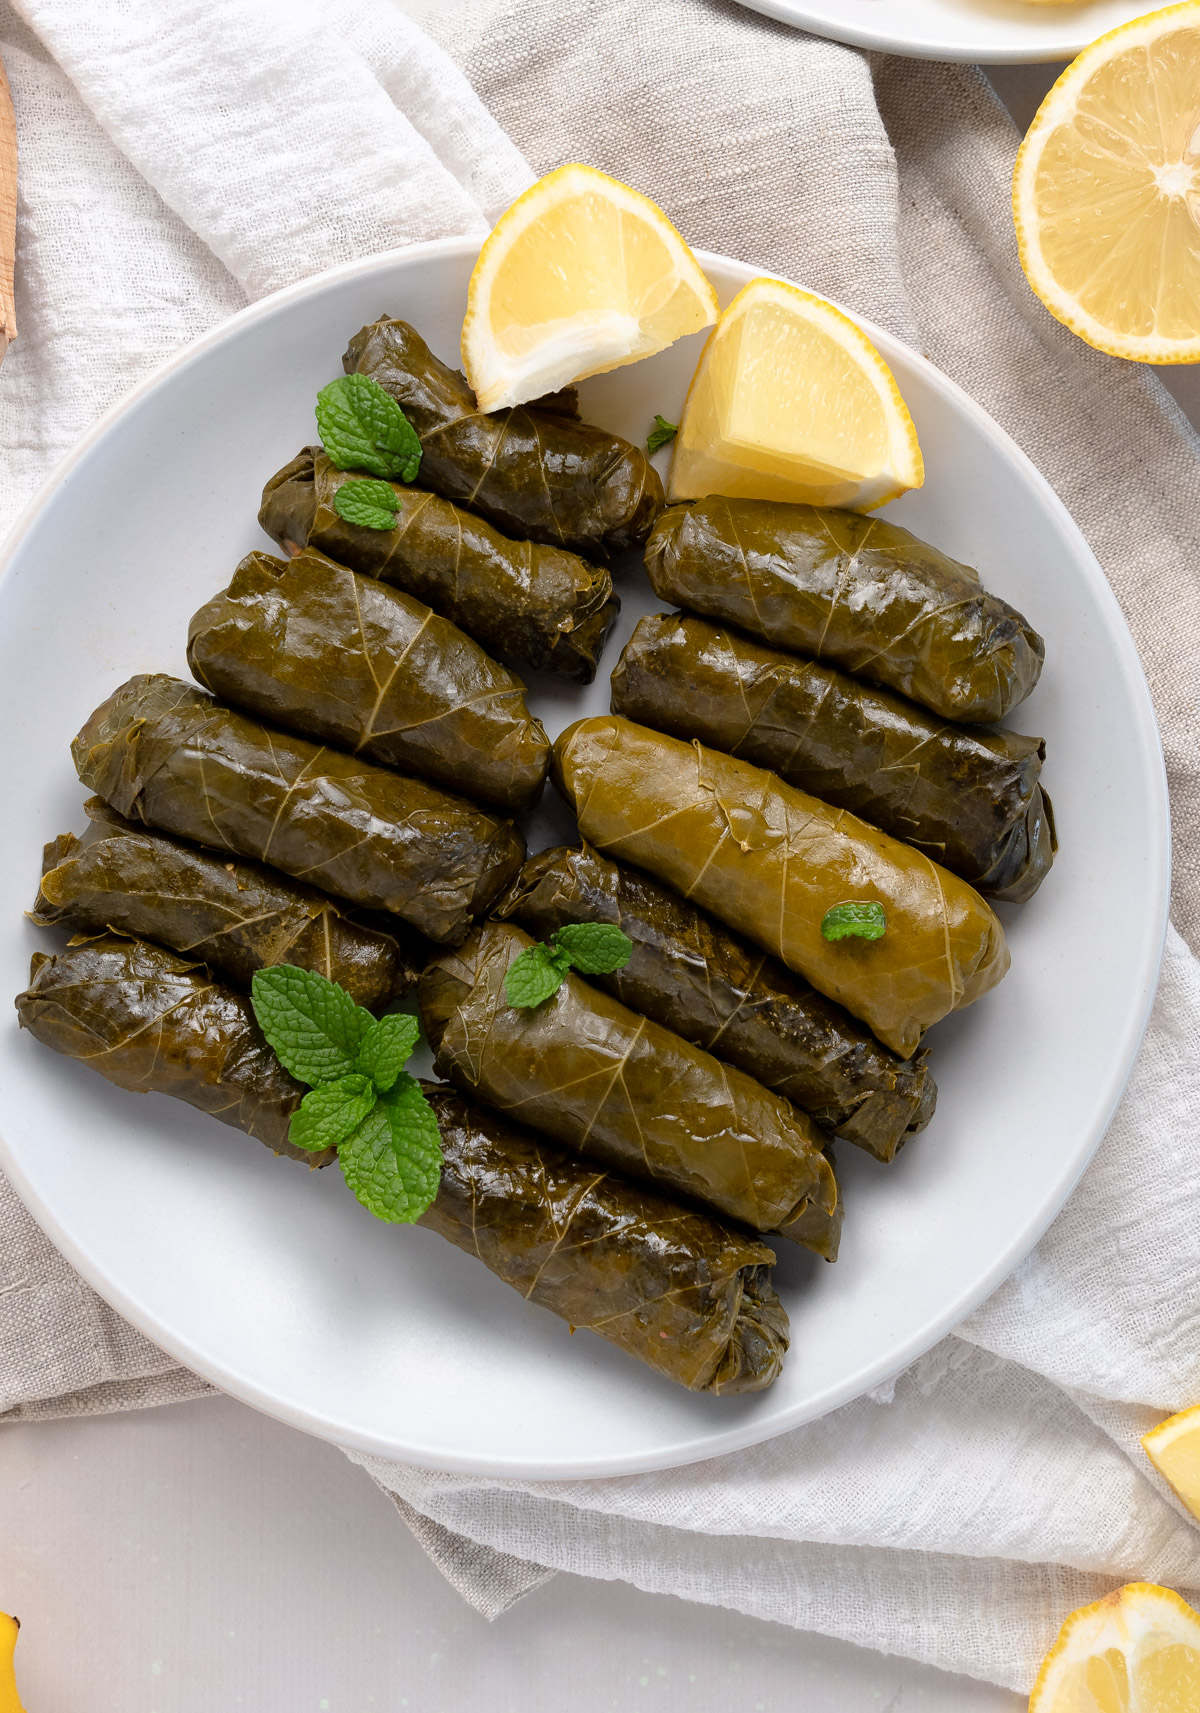 12 stuffed grape leaves in a white plate with a couple of lemon slices